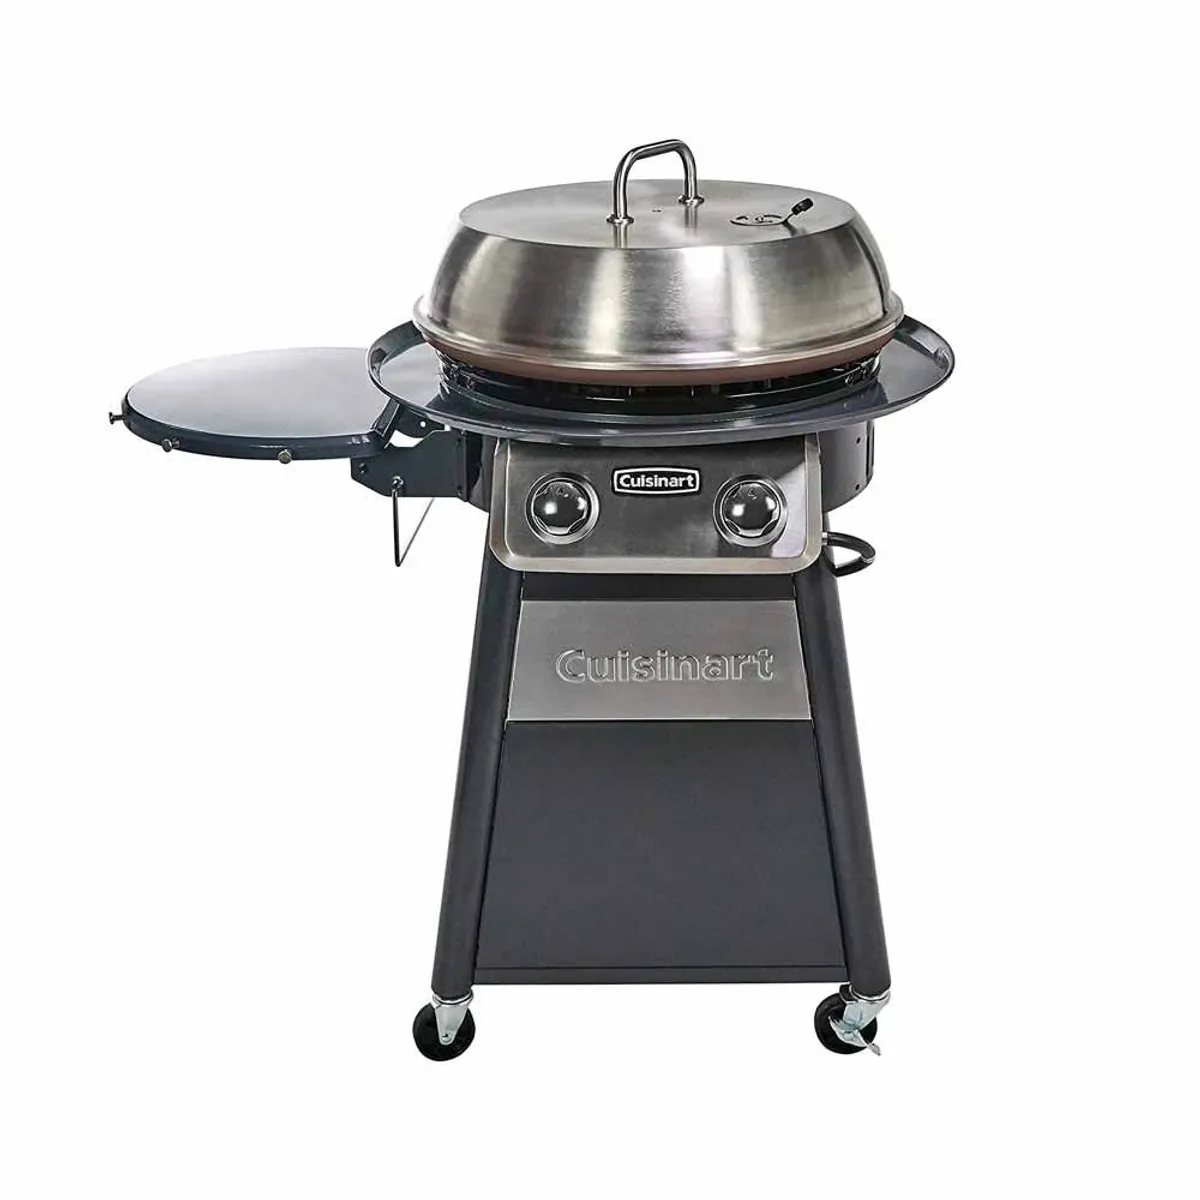 Cuisinart CGG-888 Stainless Steel Round Outdoor Flat Top Gas